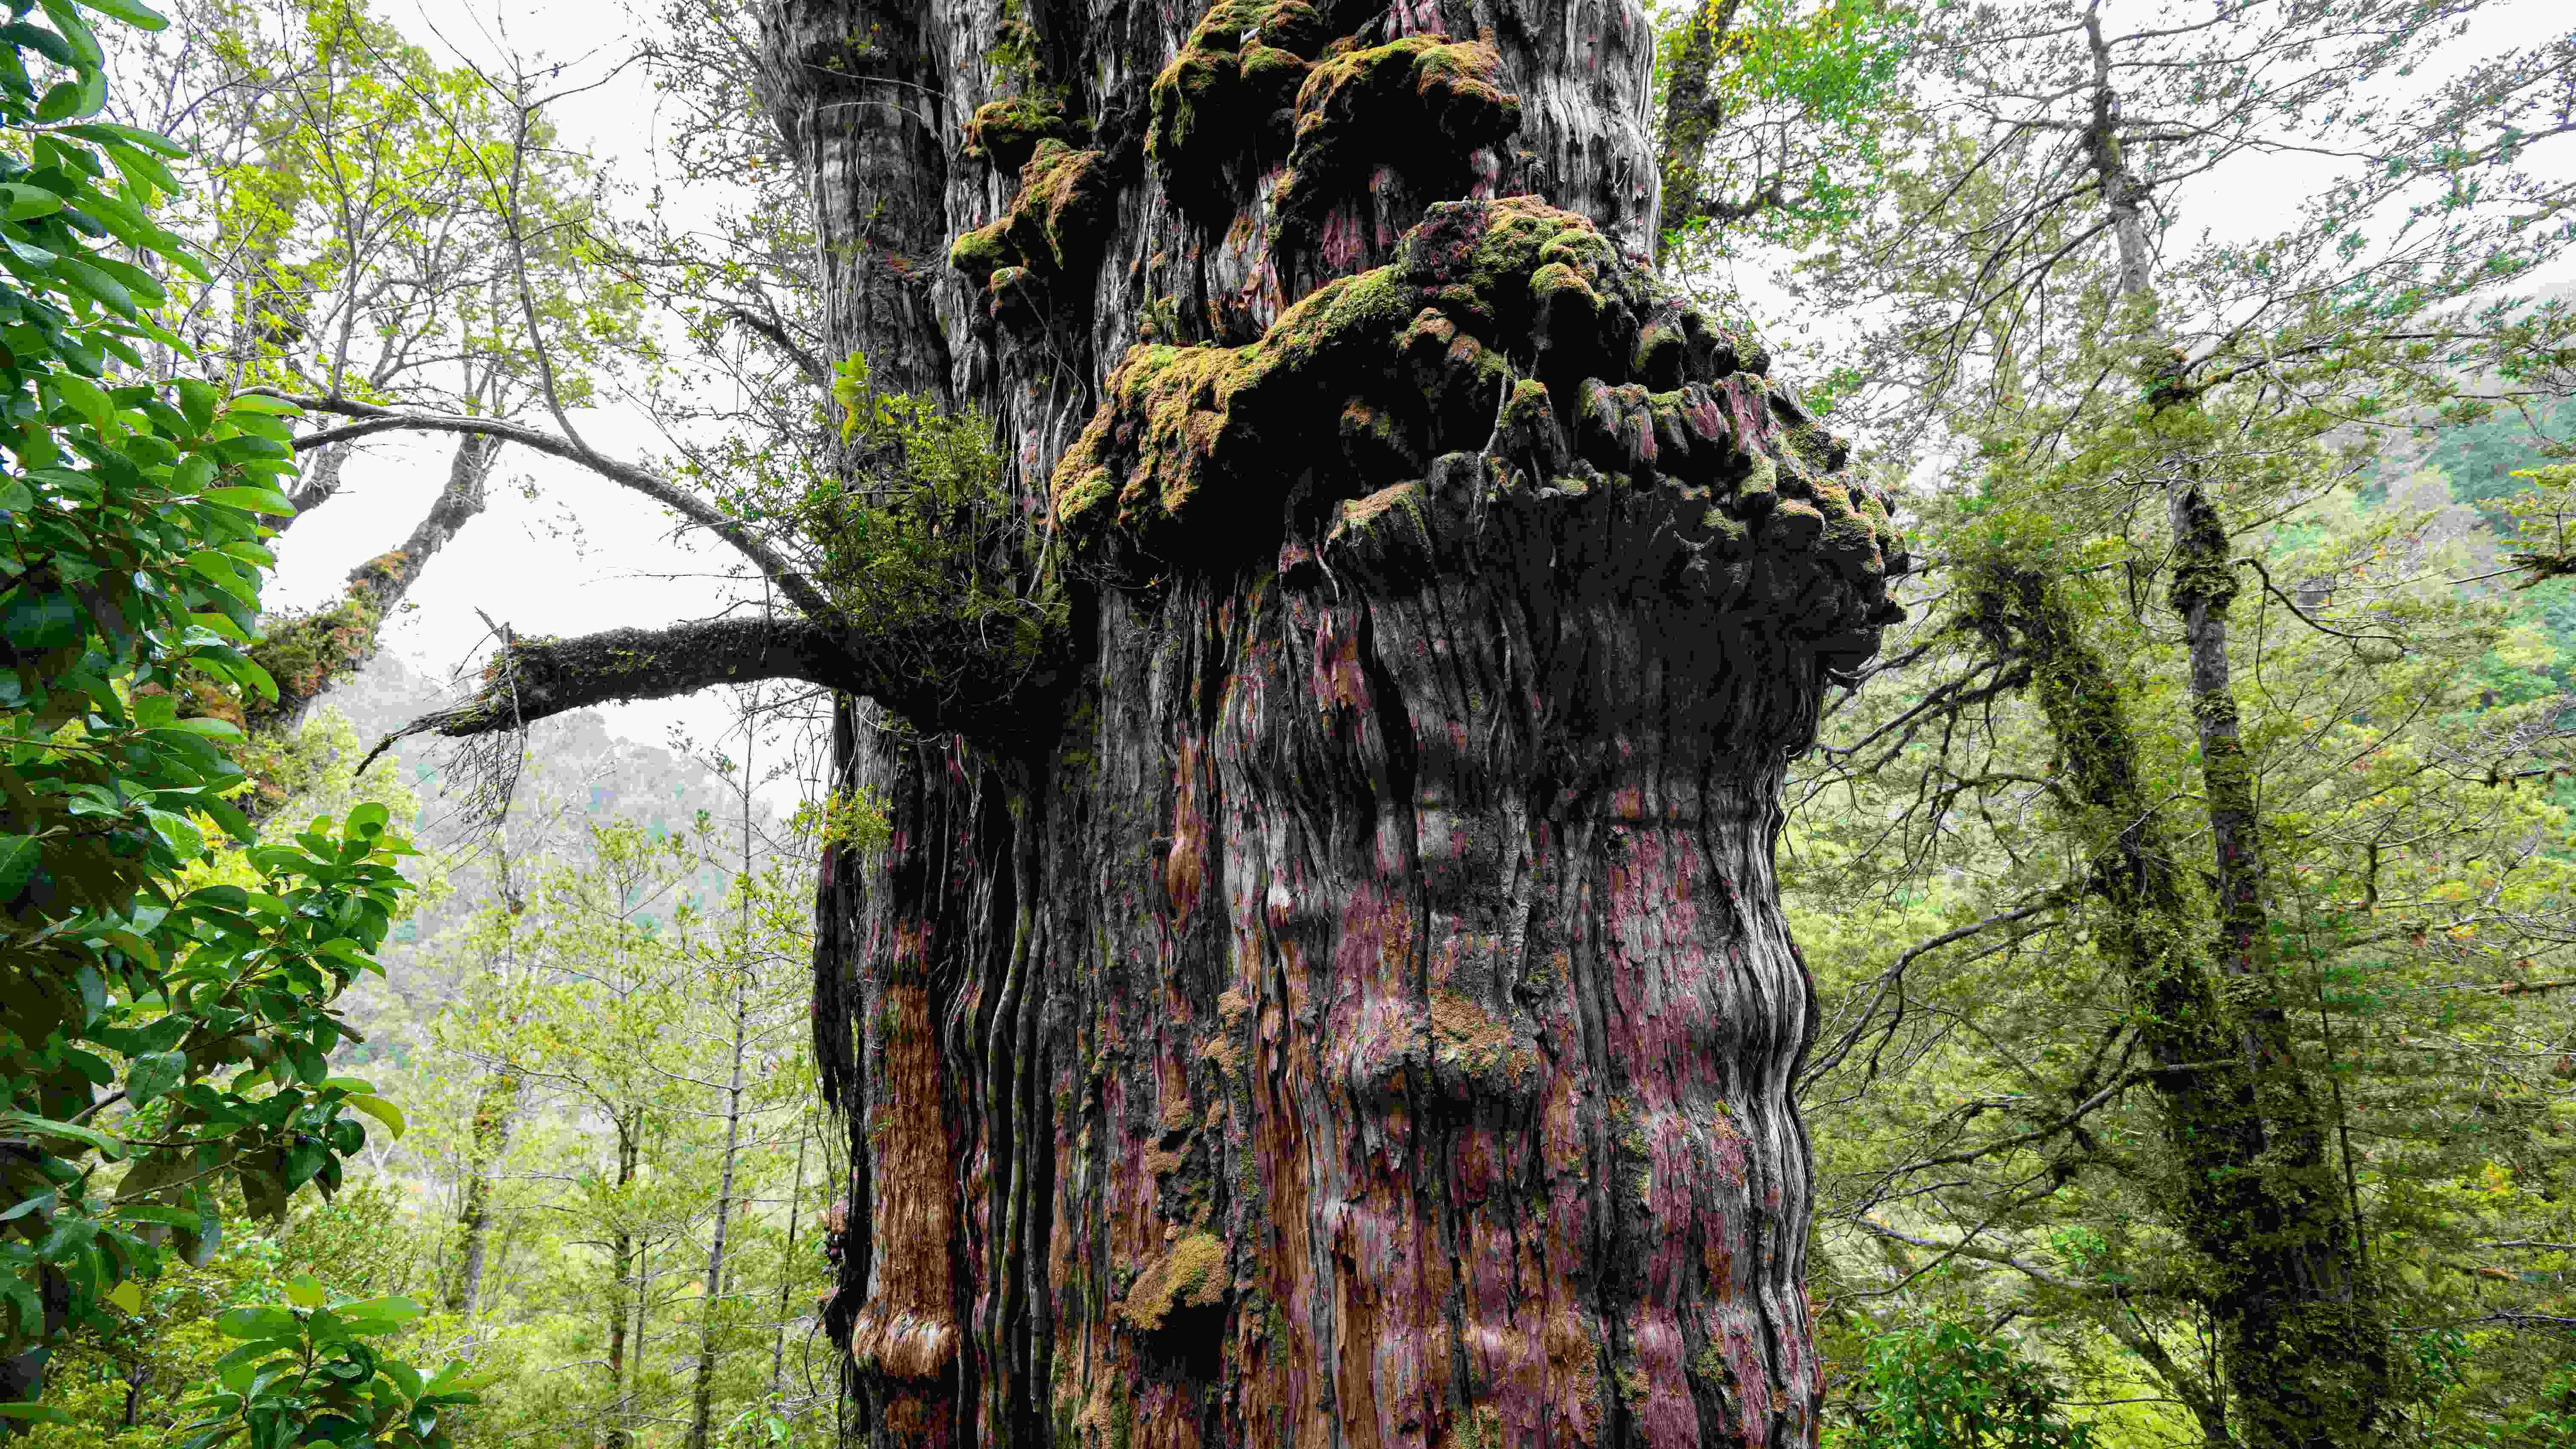 Detail of the "Alerce Milenario" at the Alerce Costero National Park in Valdivia, Chile. Credit: AFP Photo